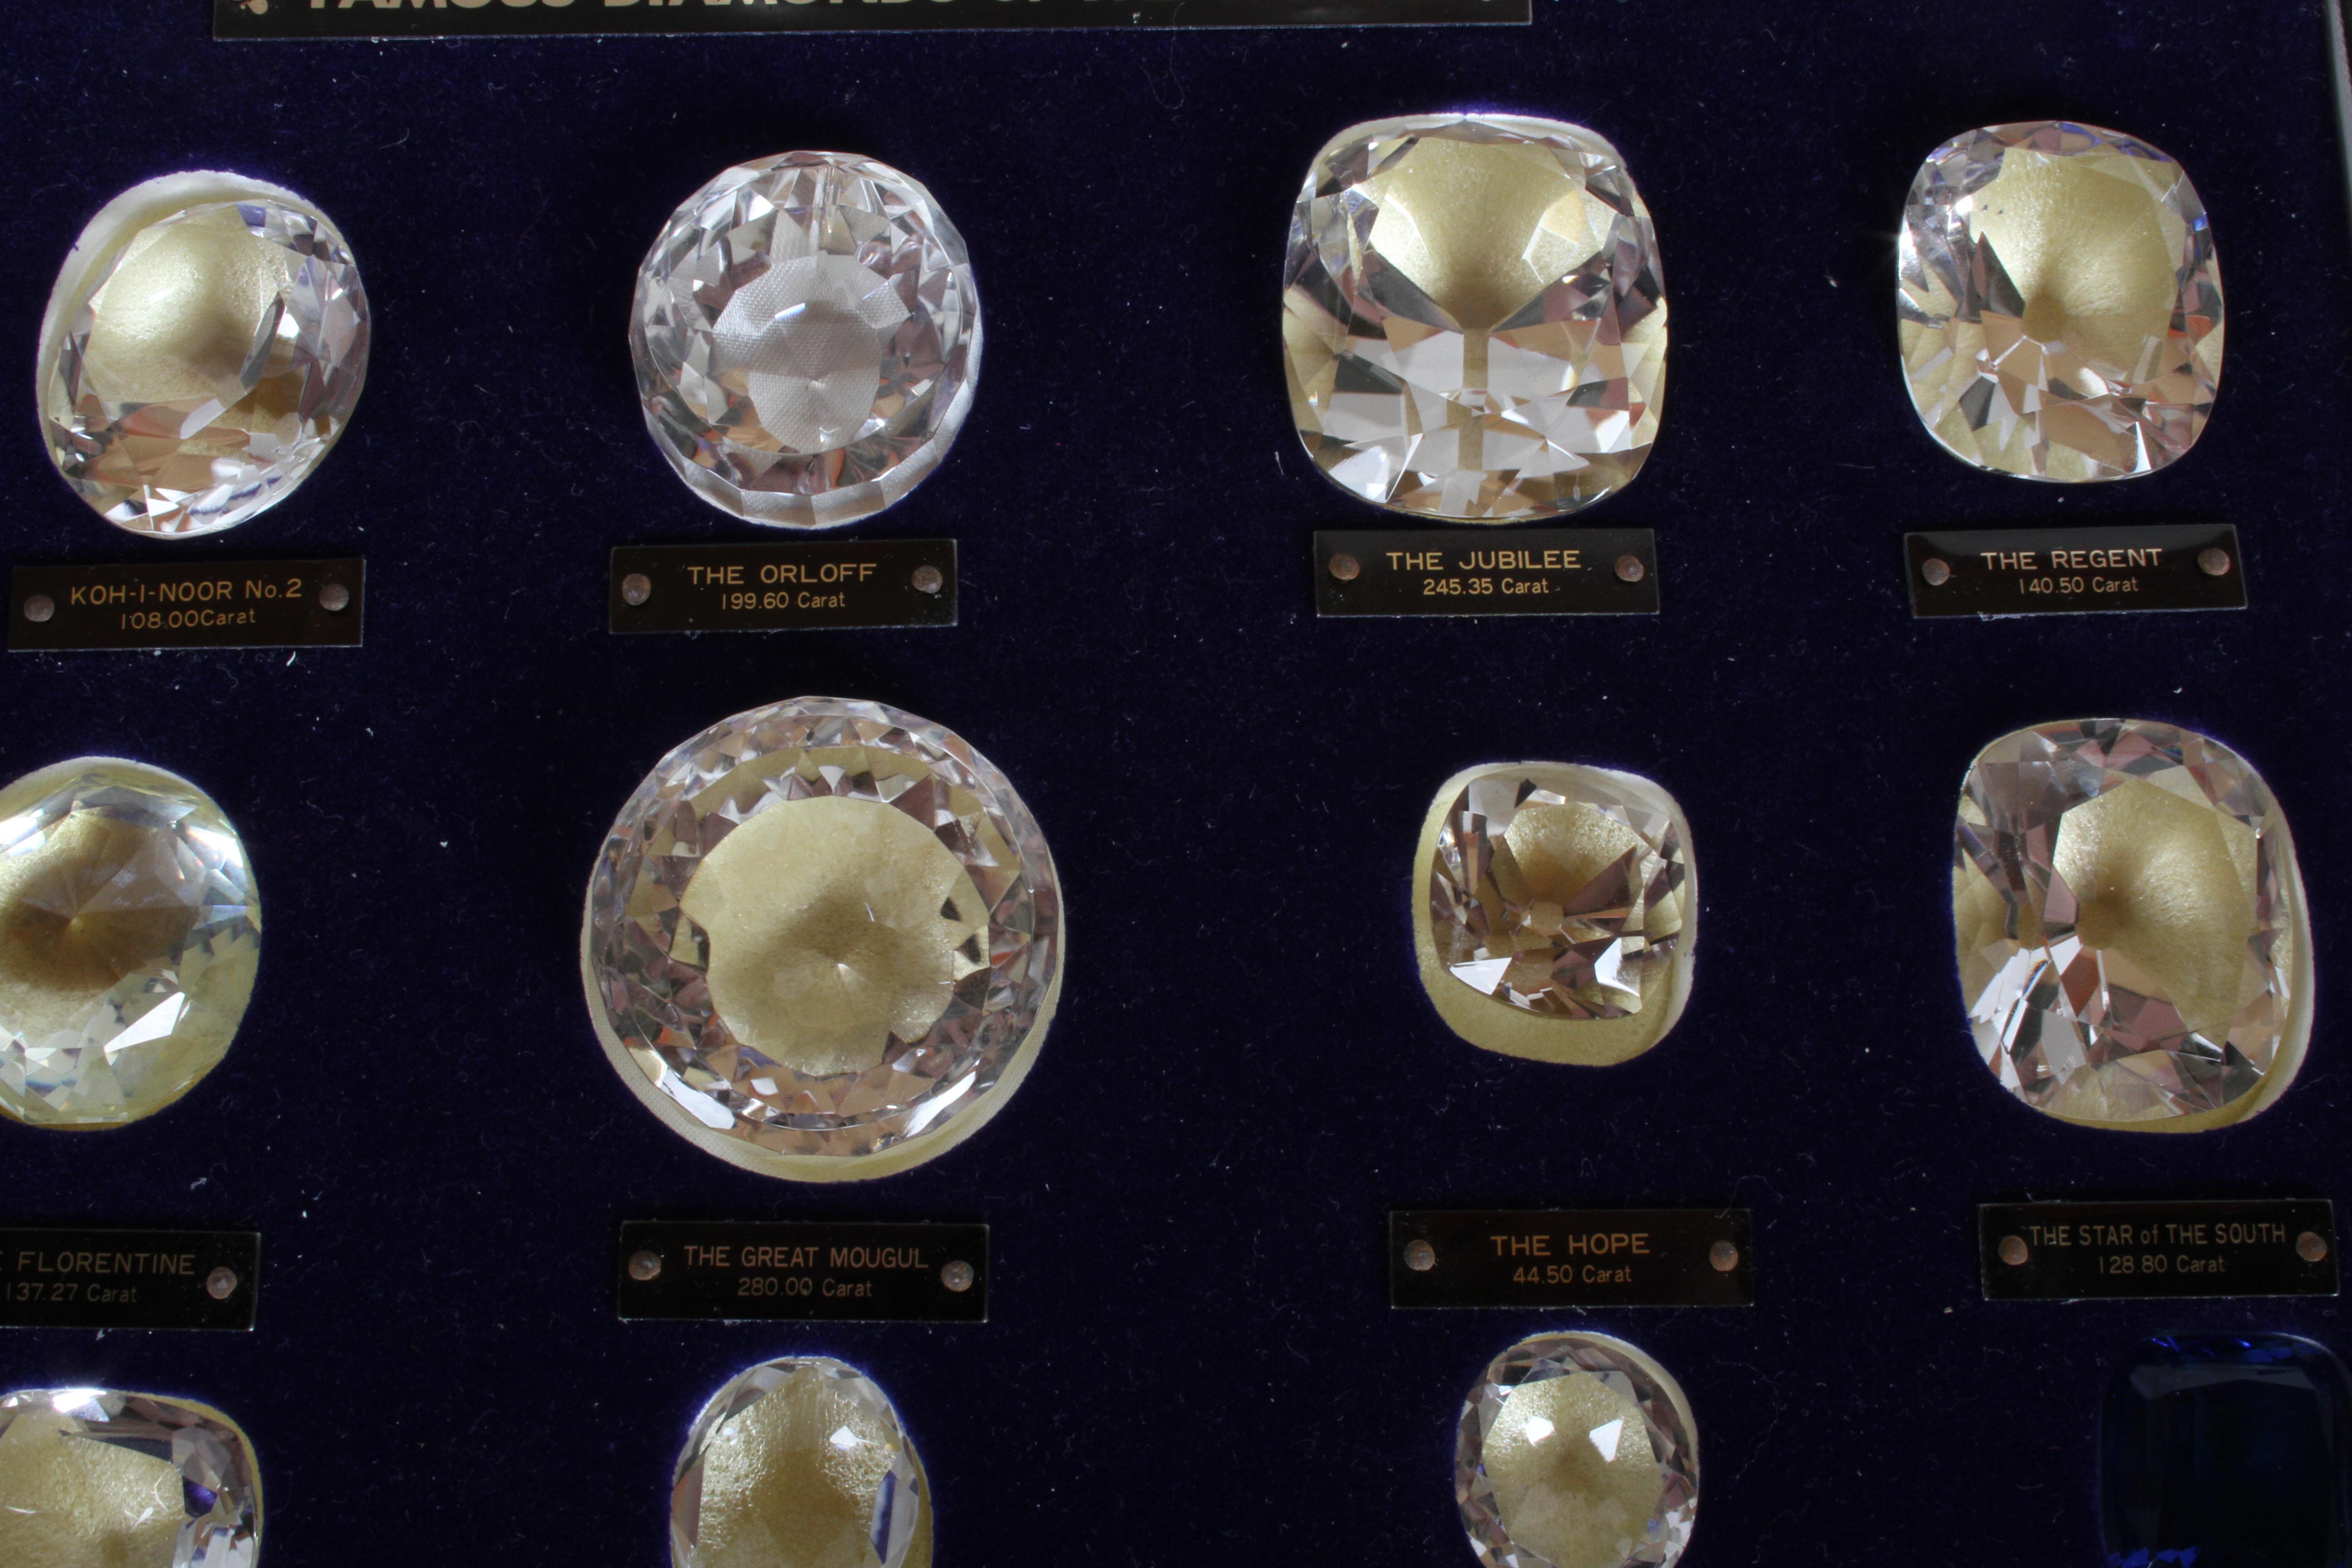 Mid-20th Century Antique Set of 15 Historical & Famous Diamonds of the World Replicas in a Case